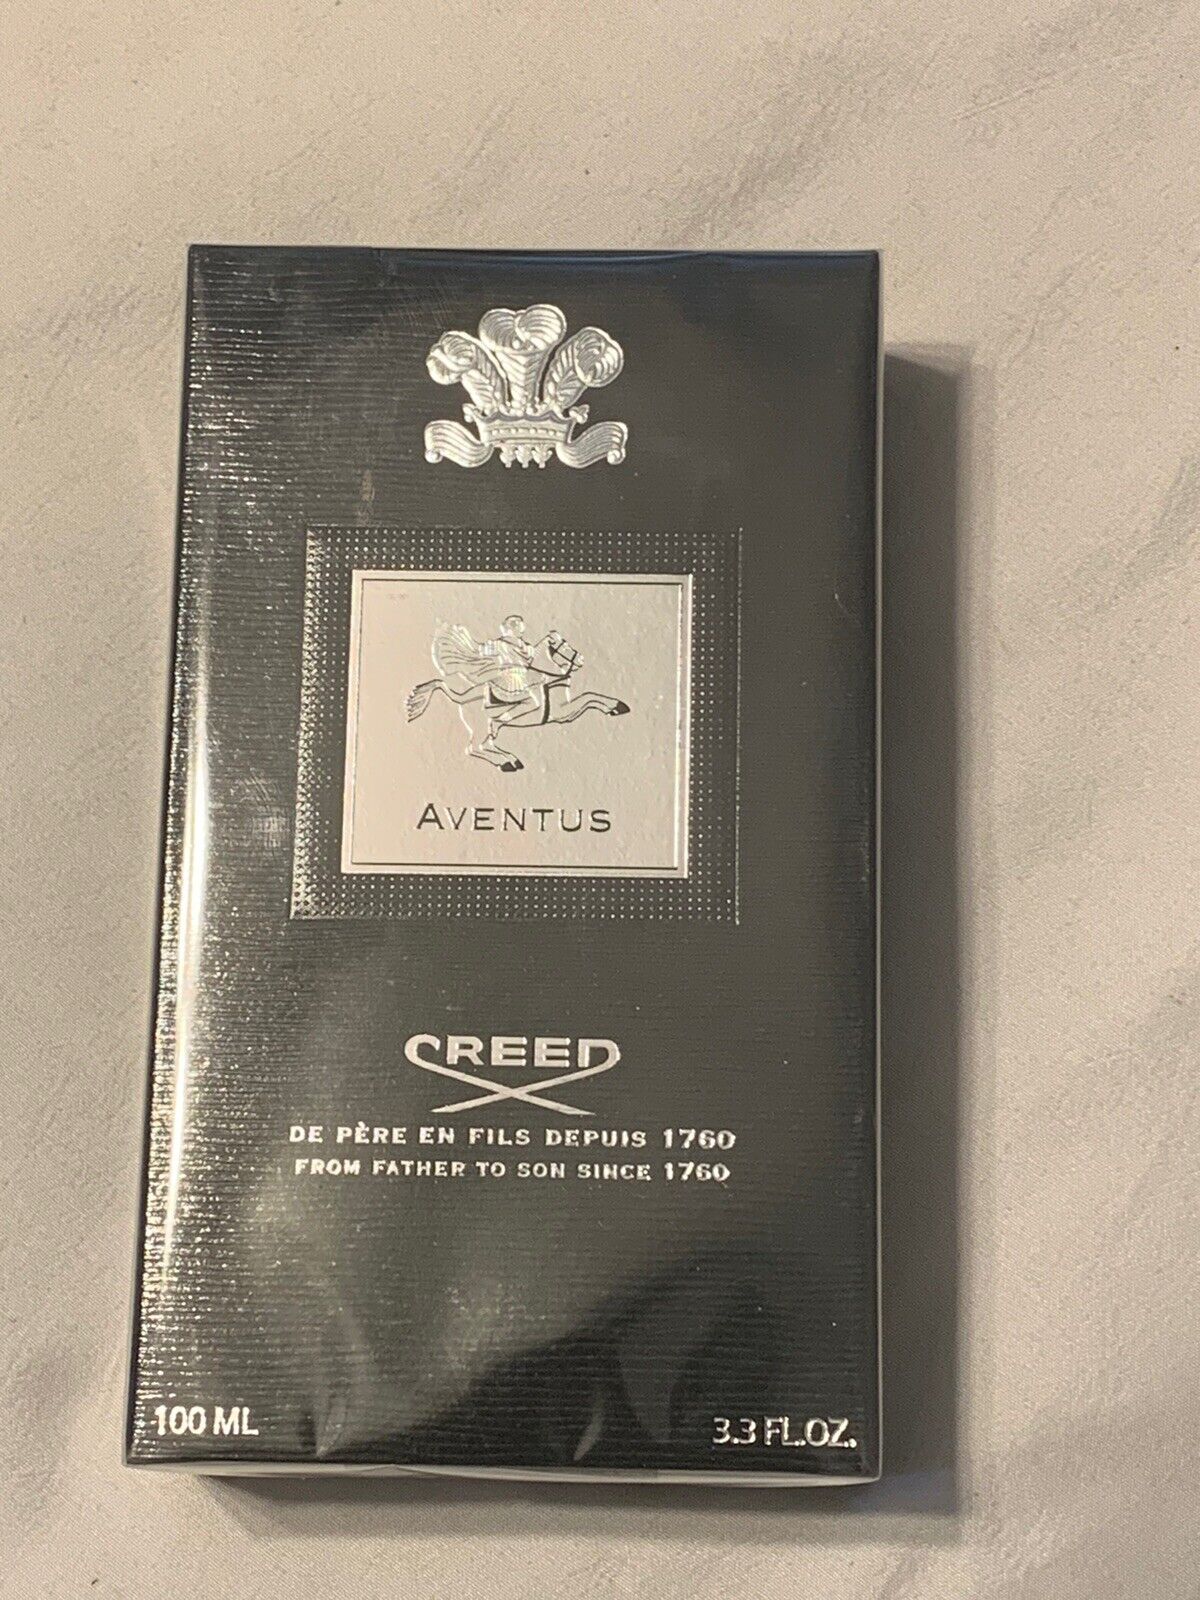 Creed Aventus EDP 3.3 Oz 100 ml - Cologne for Men Brand New In Box